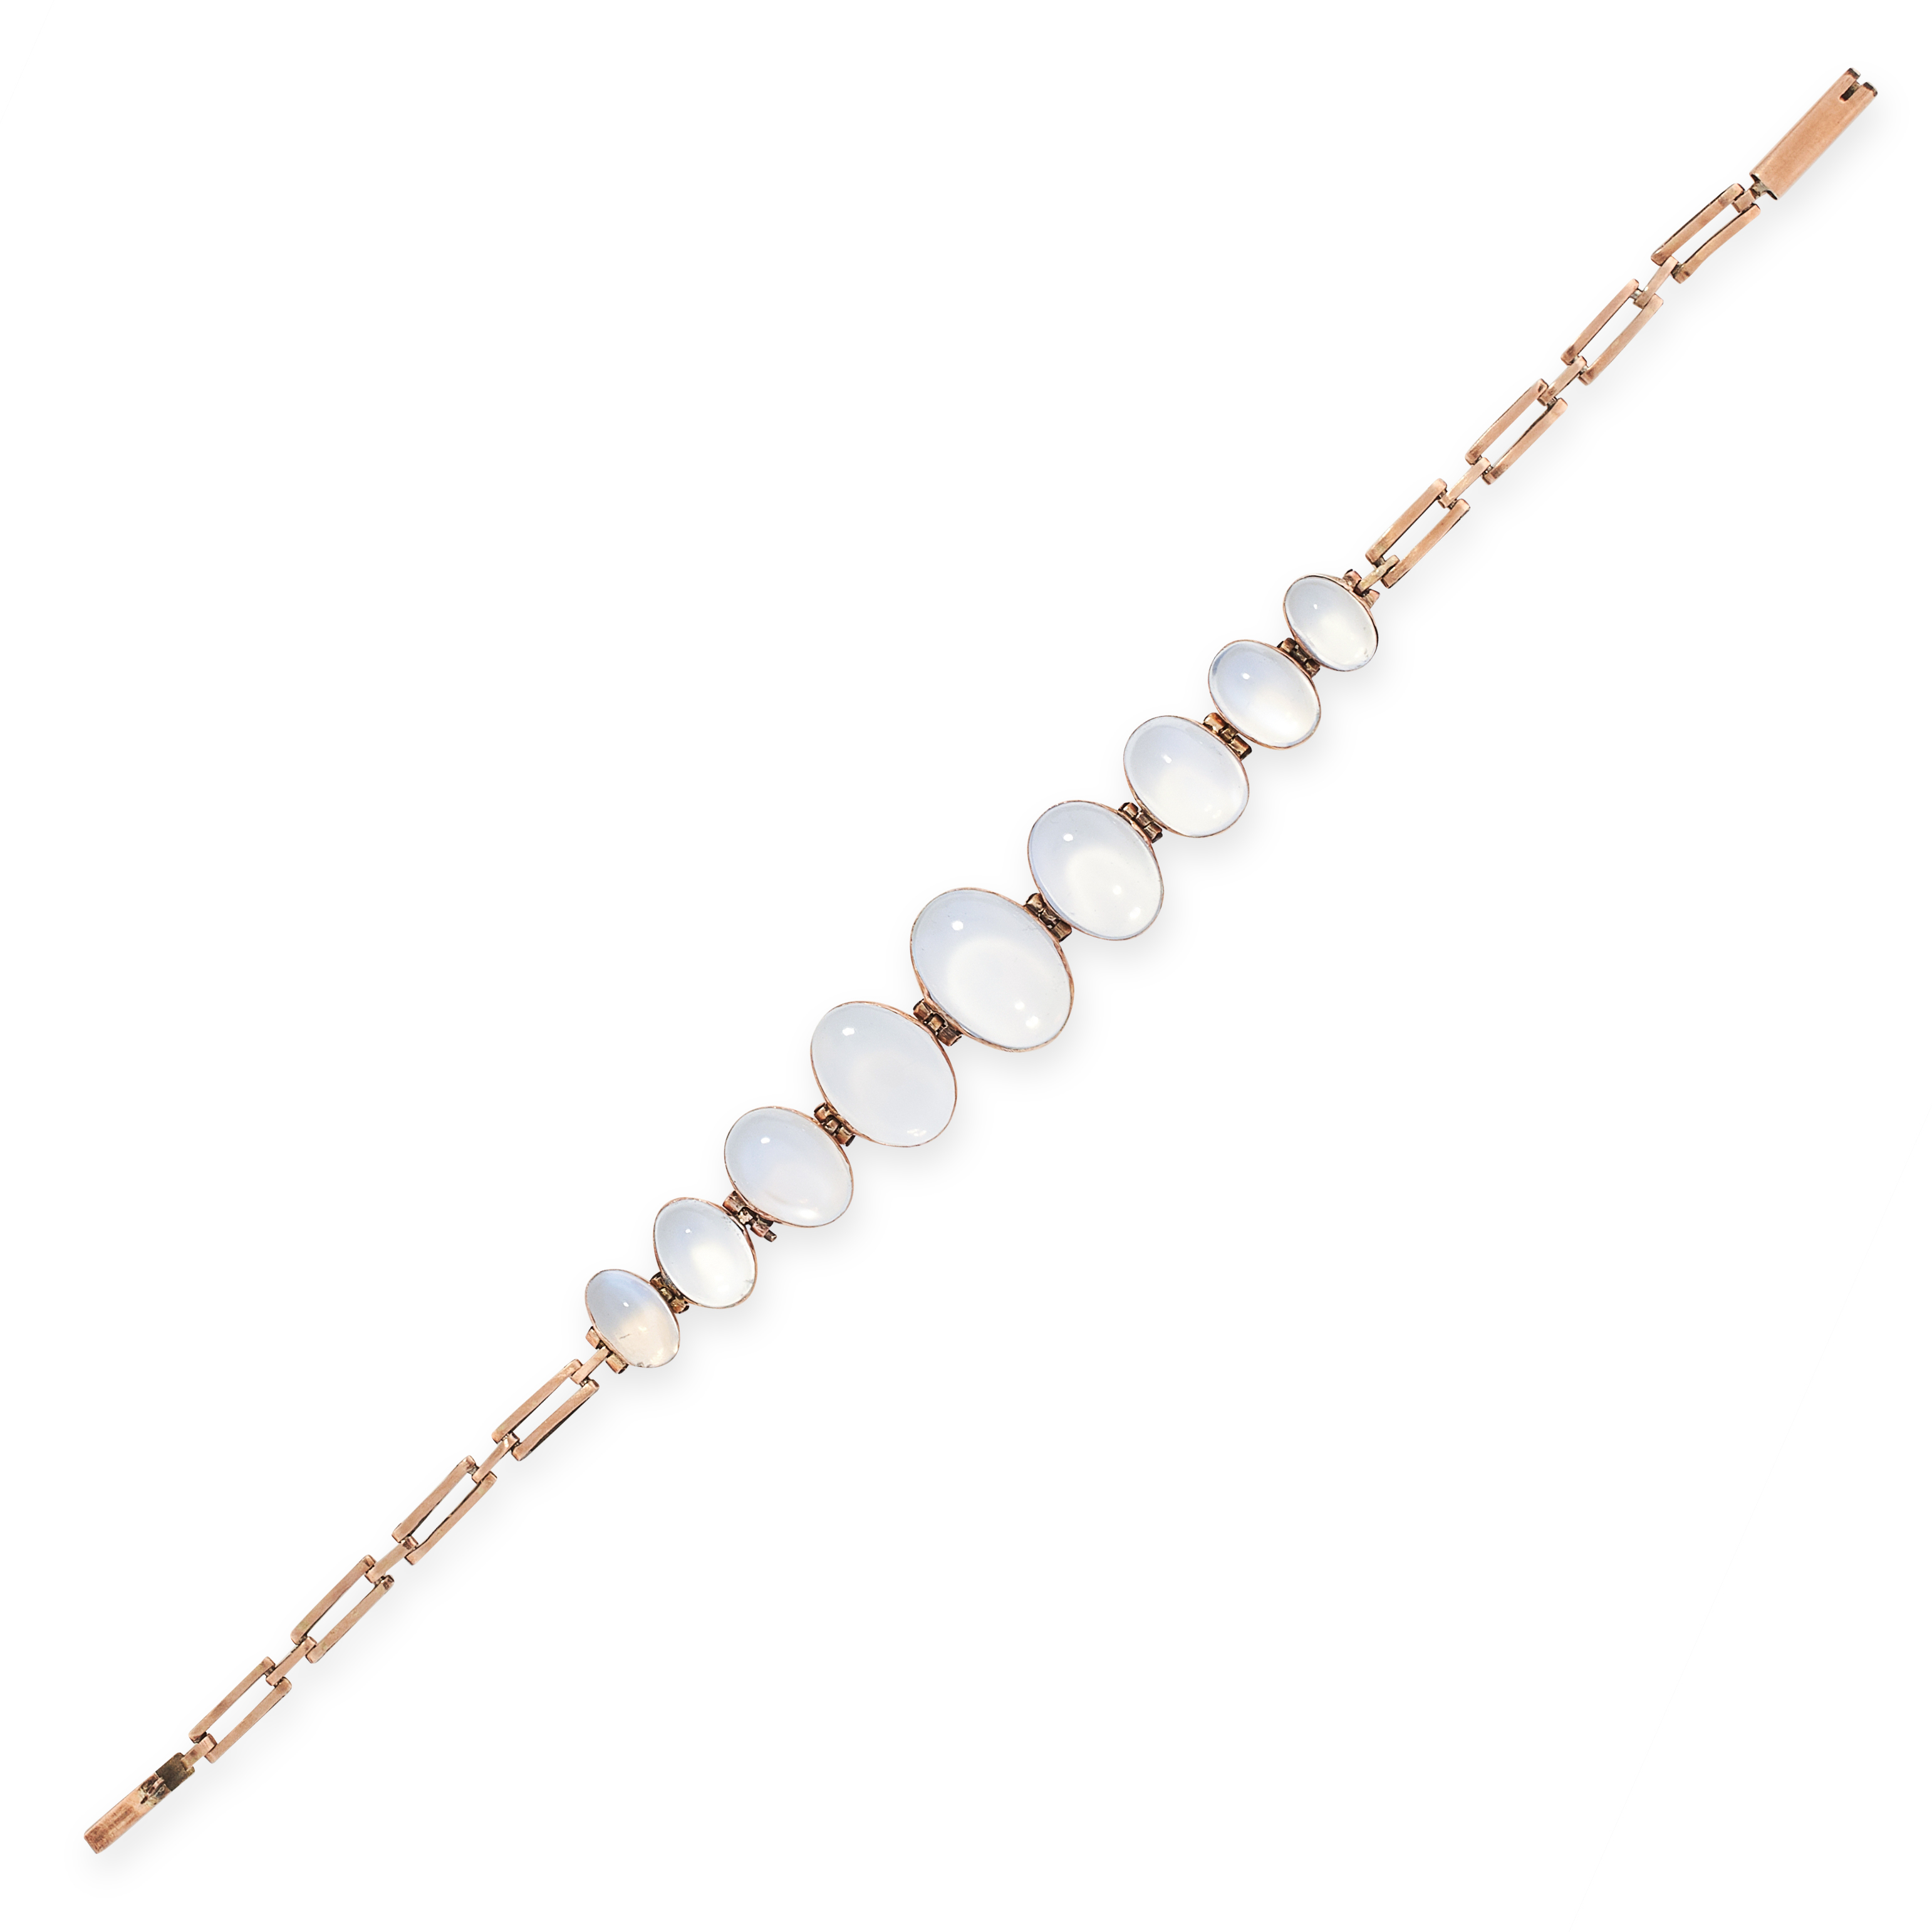 AN ANTIQUE MOONSTONE BRACELET, EARLY 20TH CENTURY in yellow gold, set with a row of seven